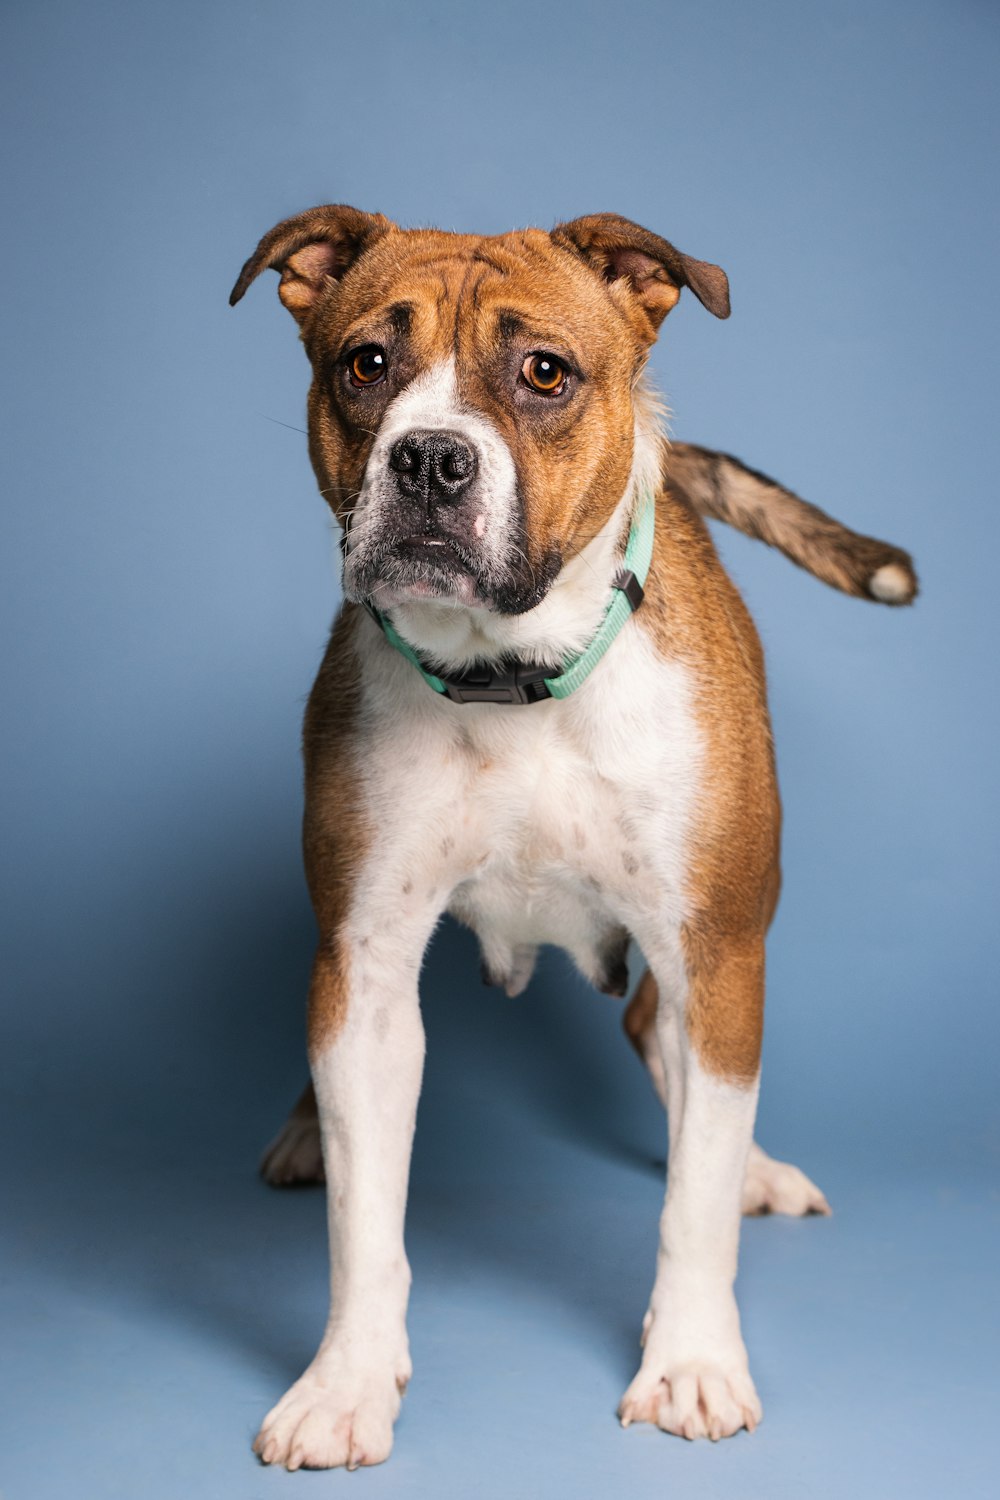 a brown and white dog standing on a blue background